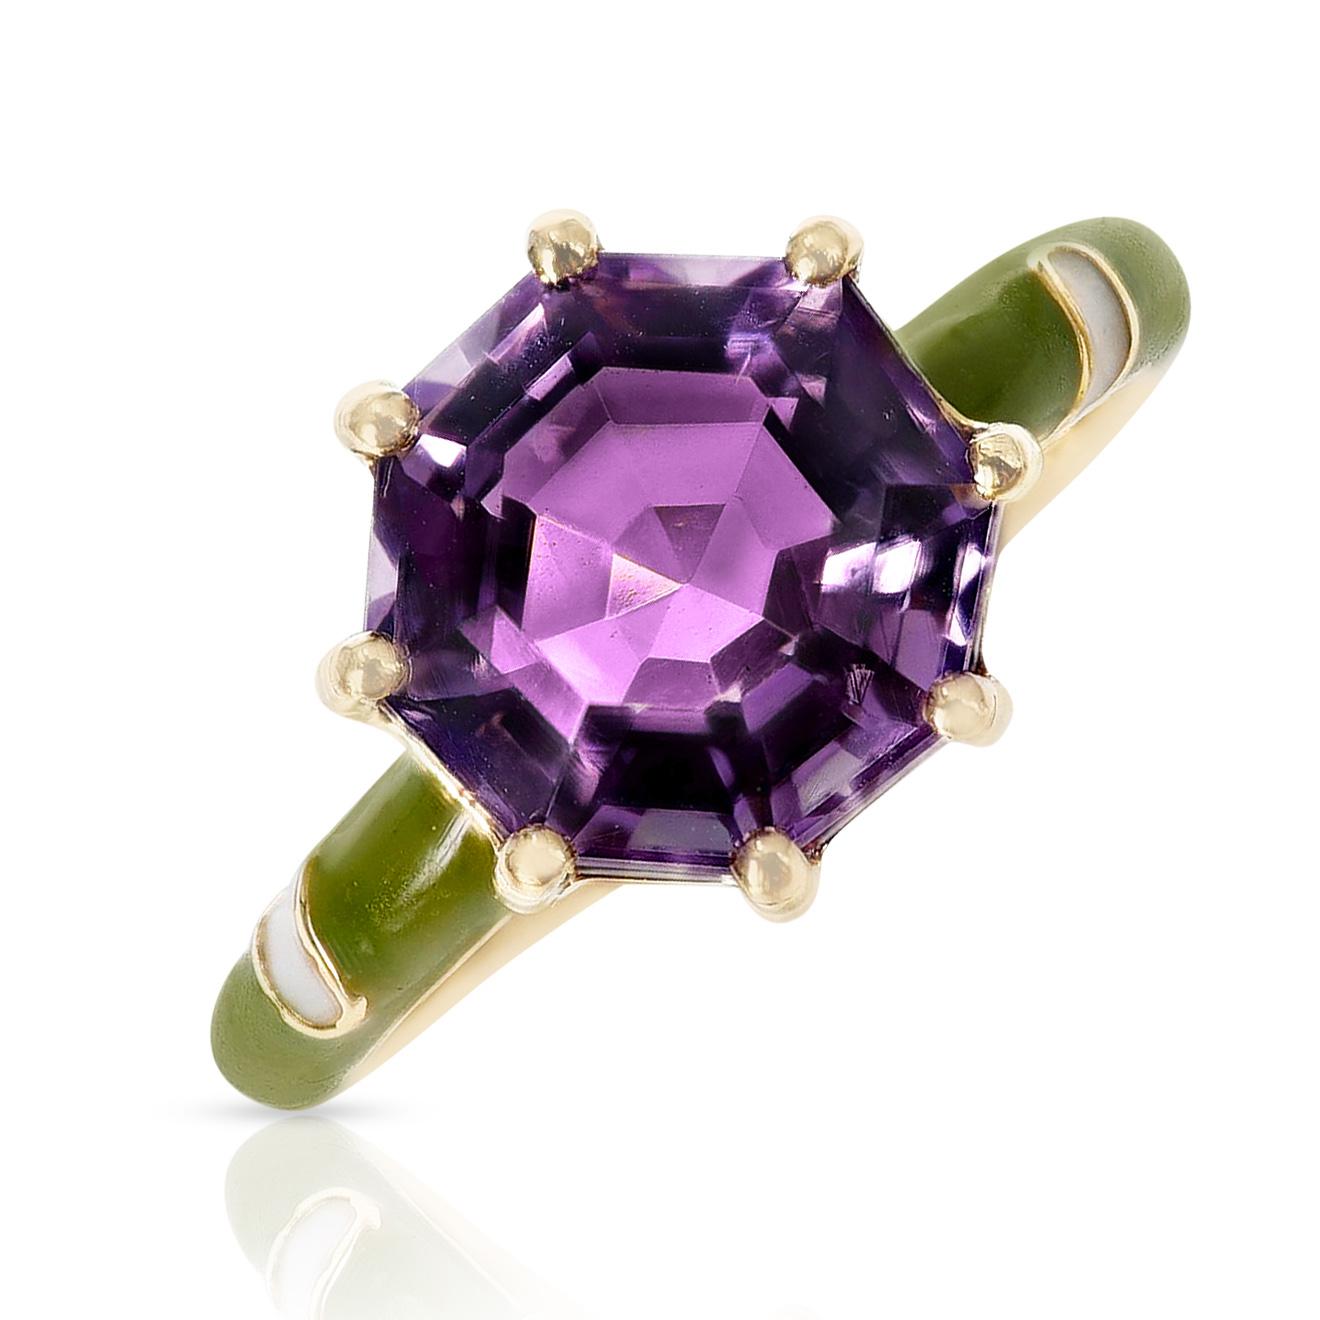 2.48 Ct. Octagonal Amethyst with Green and White Enamel, 14k Yellow Gold 1